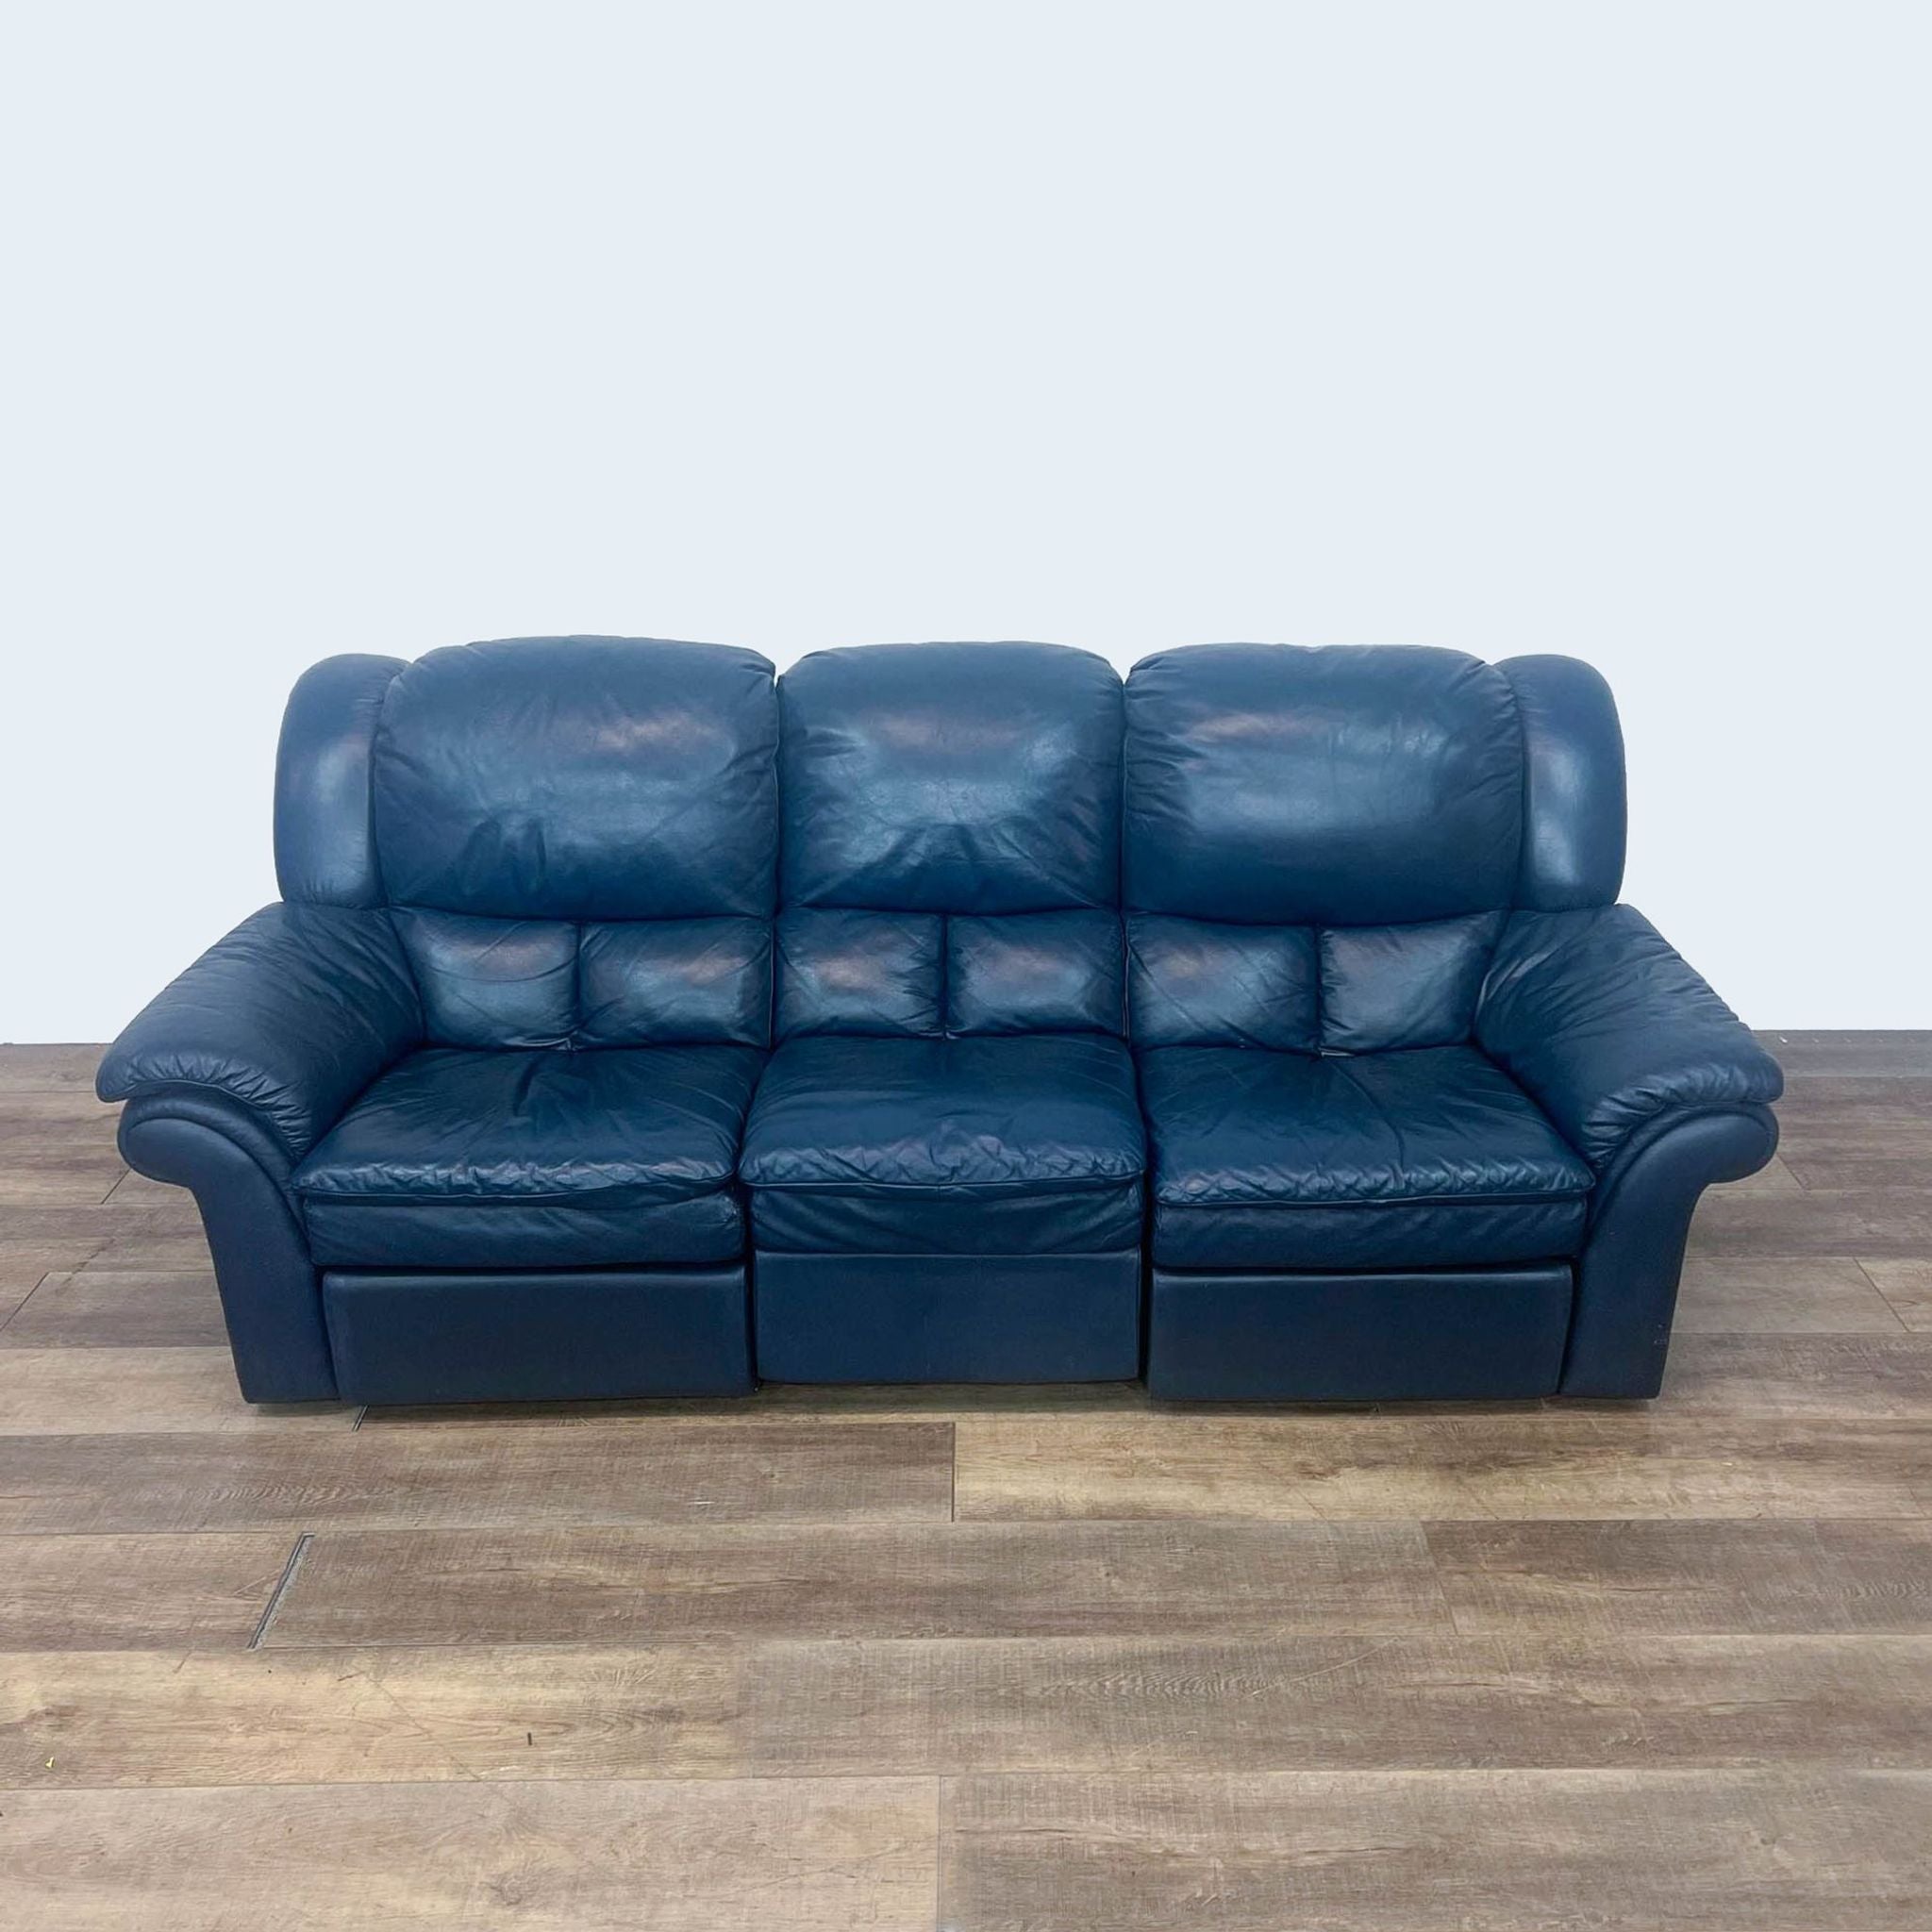 Dark blue Reperch leather sofa with high back and pillow top arms, shown from the front.